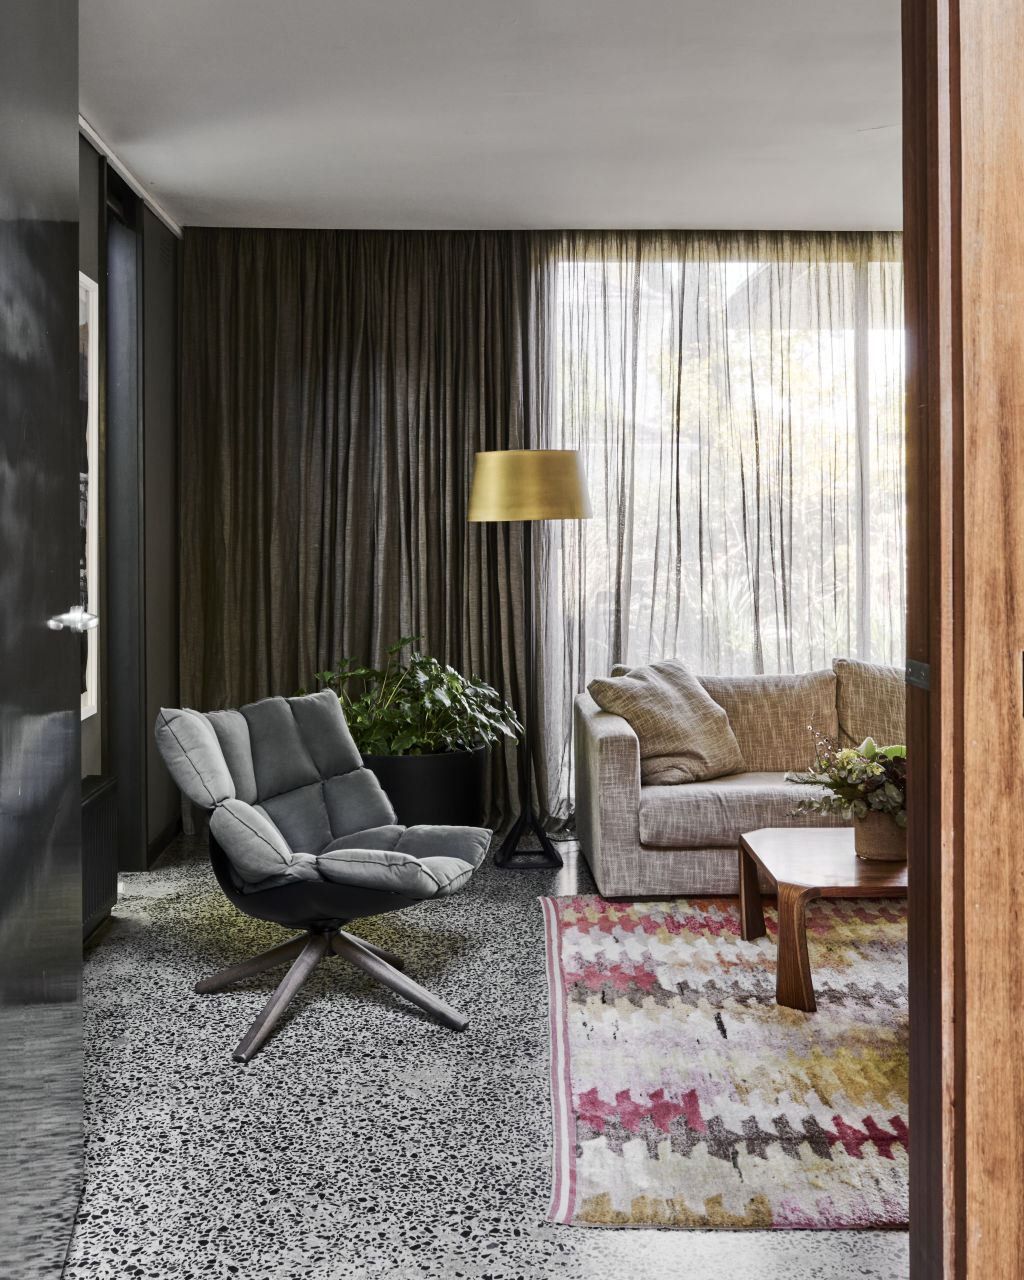 Polished concrete floors flow across into the central living area. Photo: Supplied